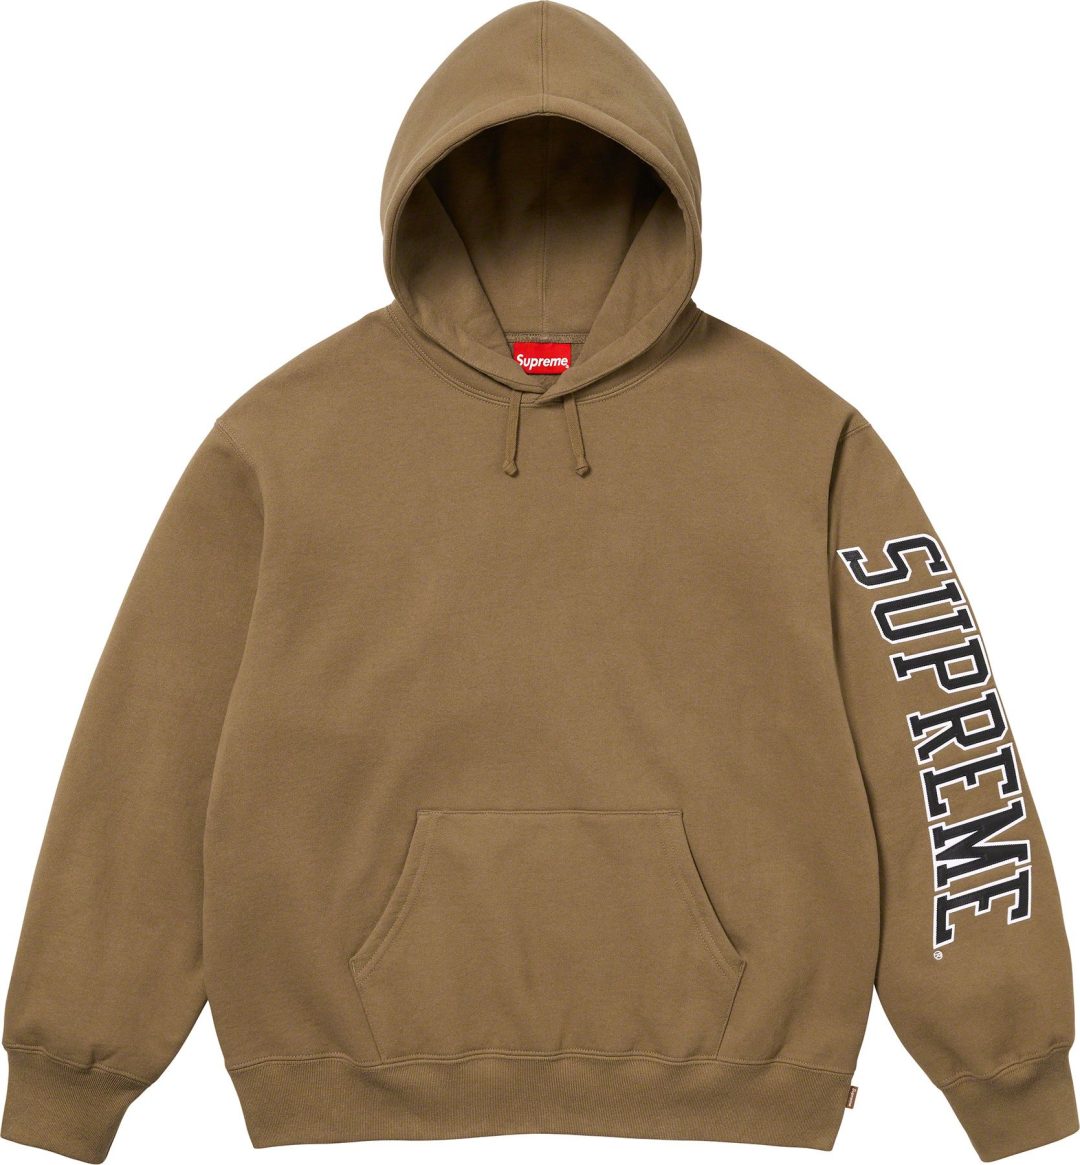 Supreme 公式通販サイトで9月2日 Week2に発売予定の23FW 23AW 新作 ...